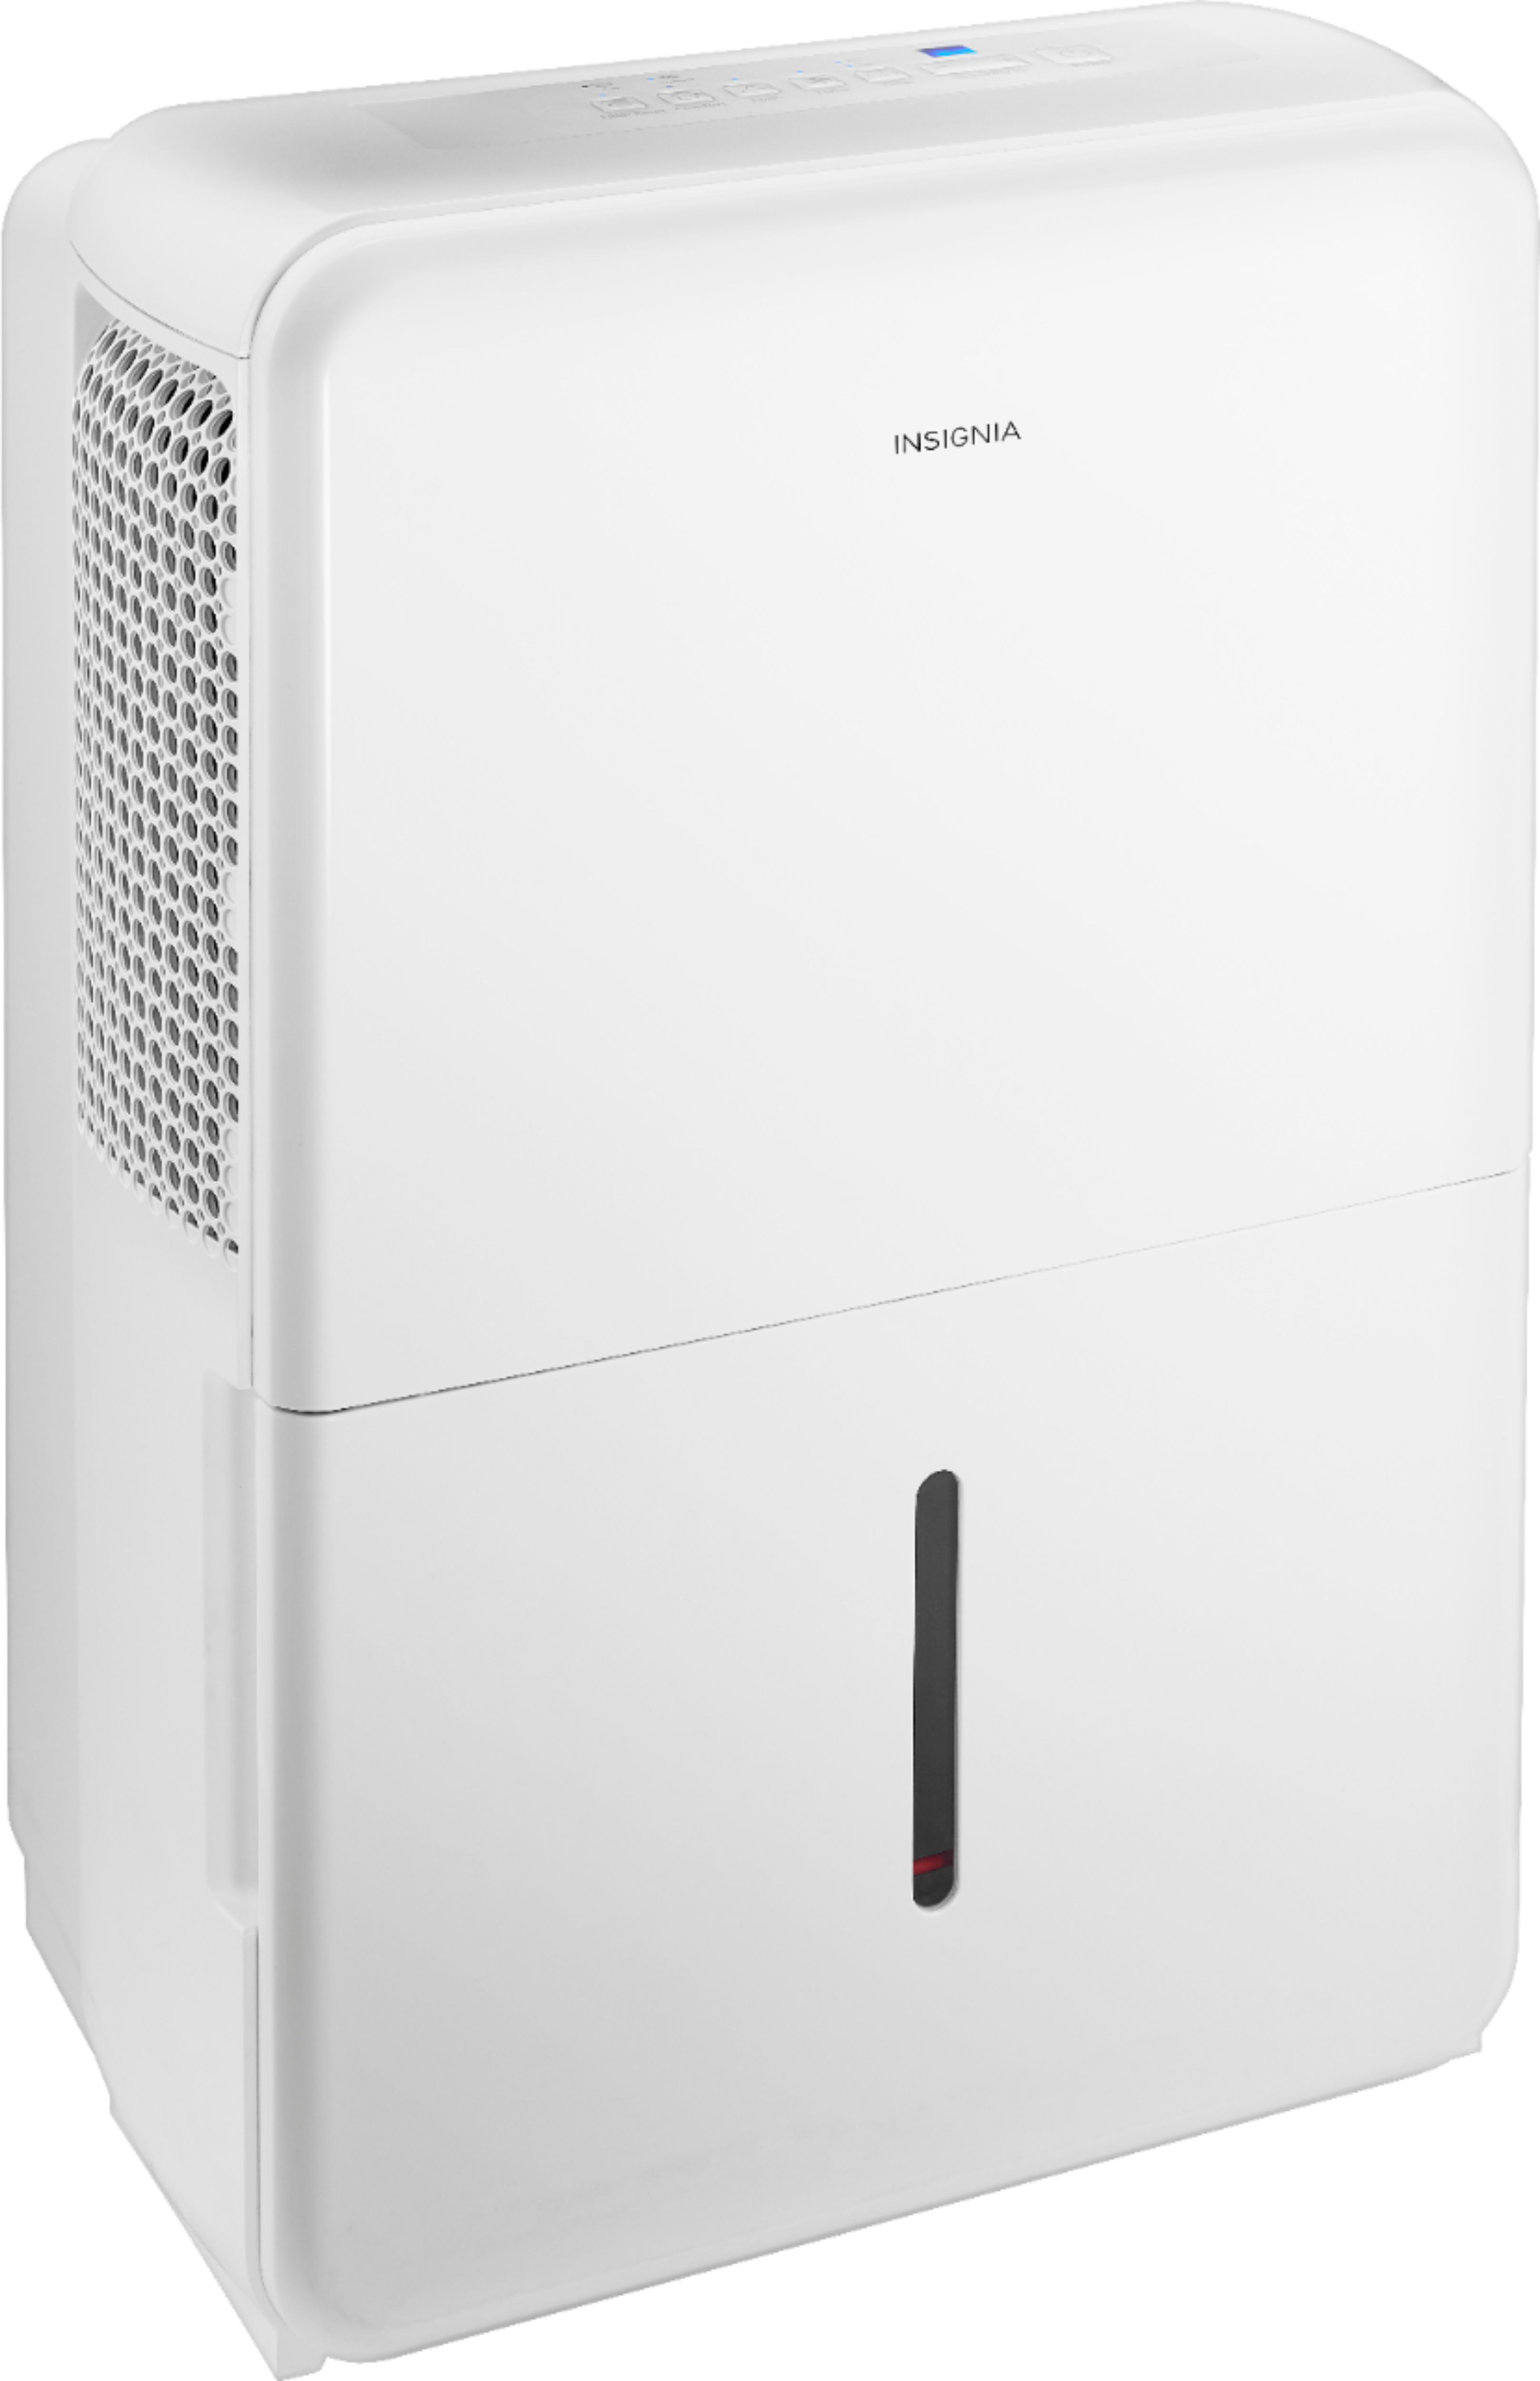 Angle View: Honeywell - Energy Star 20-Pint Dehumidifier with Washable Filter - White